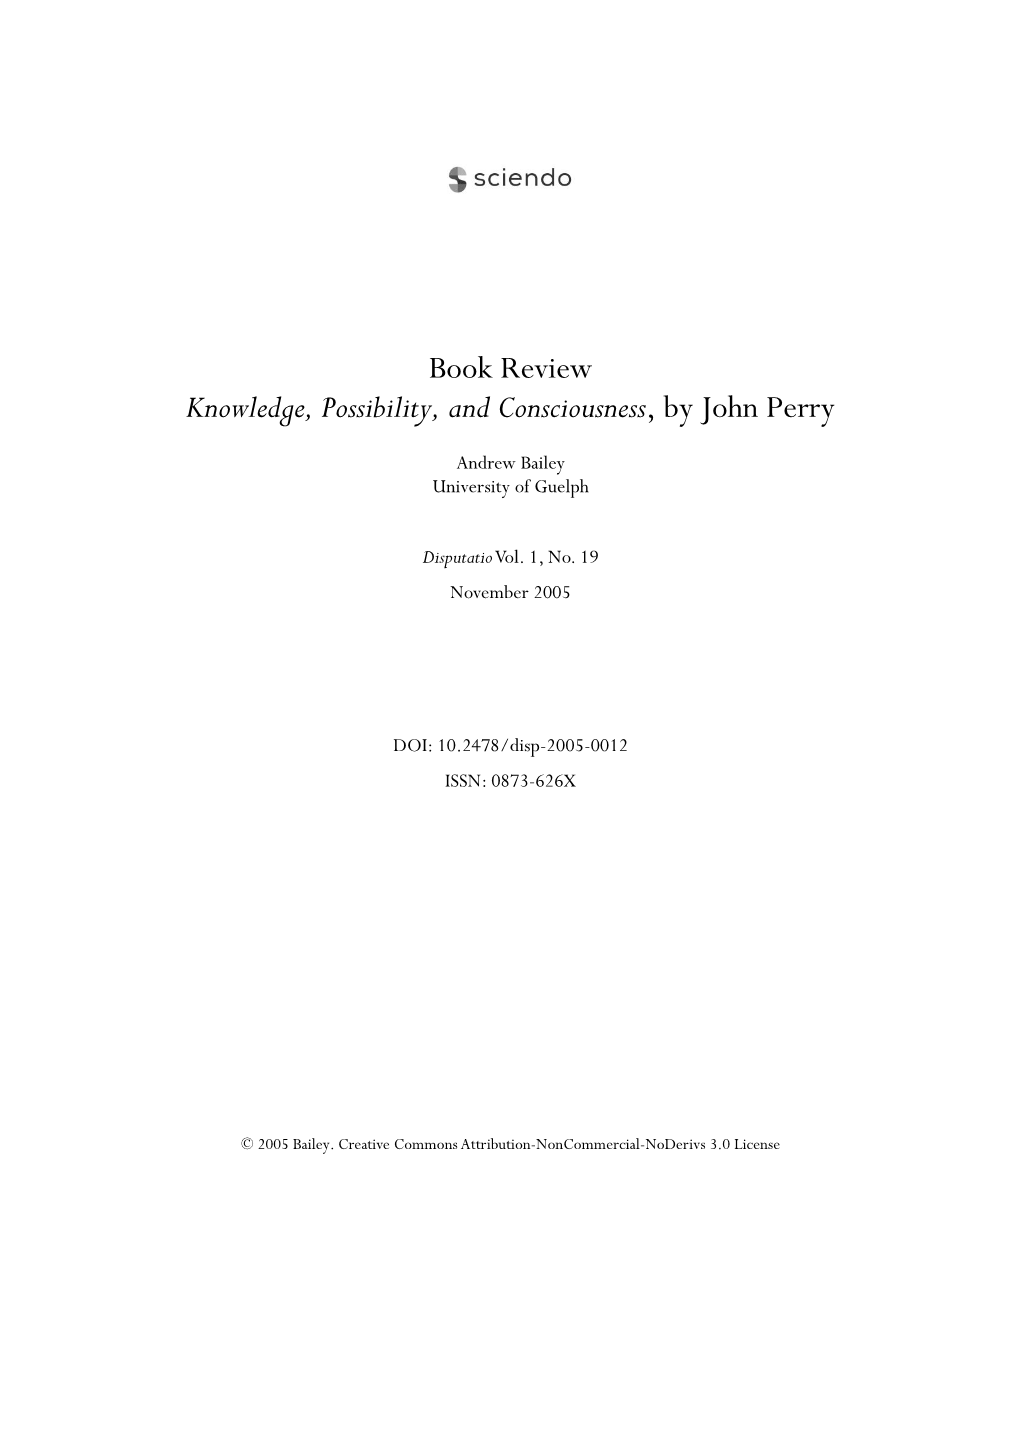 Book Review Knowledge, Possibility, and Consciousness, by John Perry